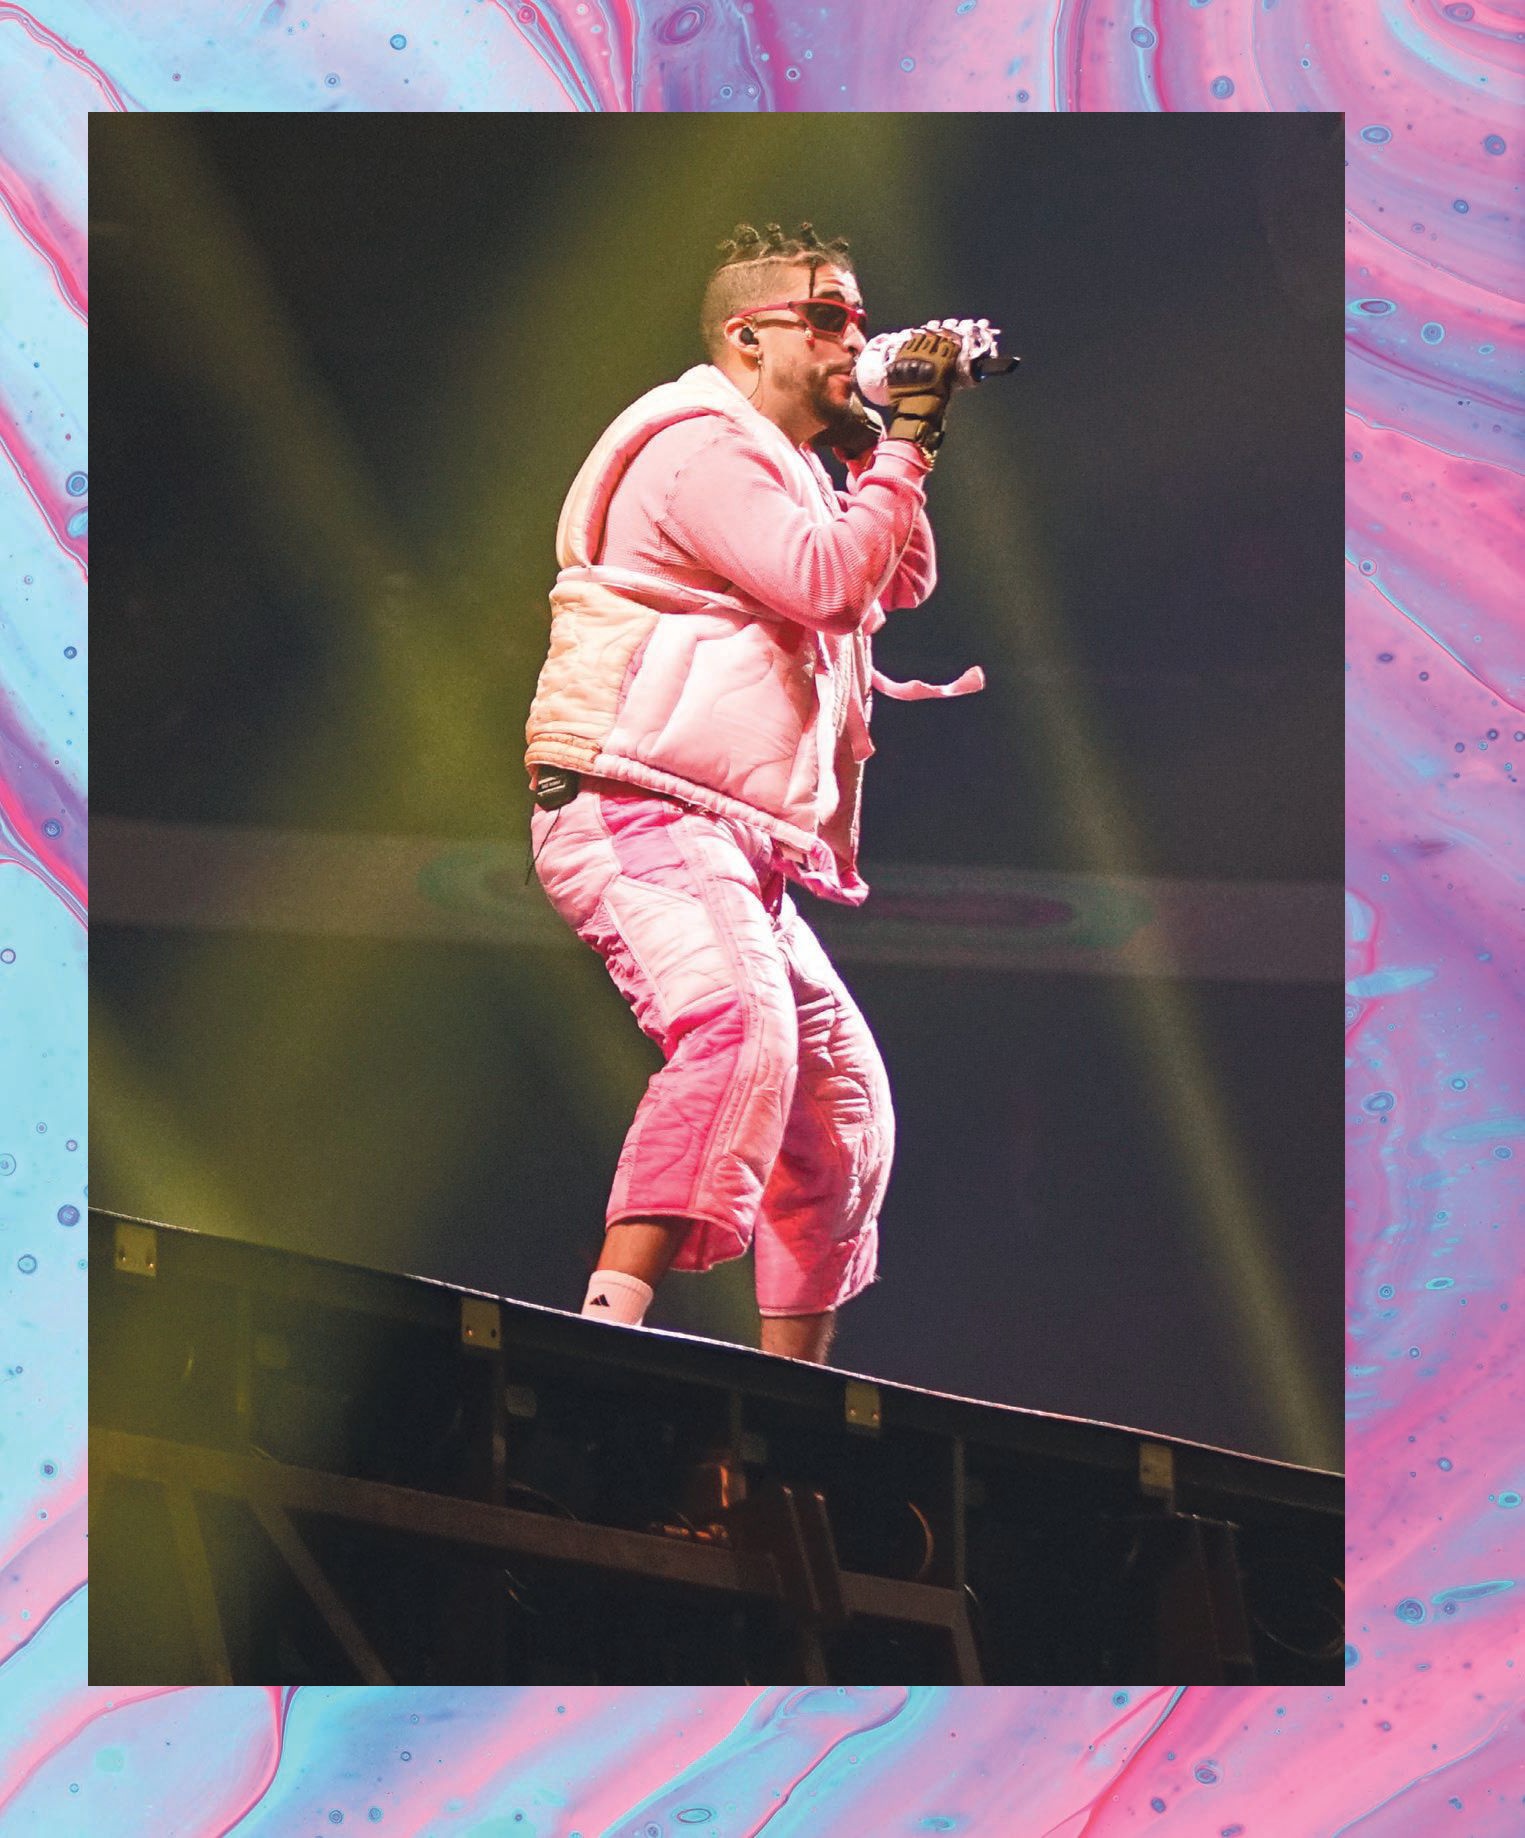 Catch Bad Bunny as the culture mogul performs his latest tunes in Atlanta this August. BAD BUNNY PHOTO BY WILLIAM PEREZ/BFA; BACKGROUND PHOTO BY PAWEL CZERWINSKI/UNSPLASH